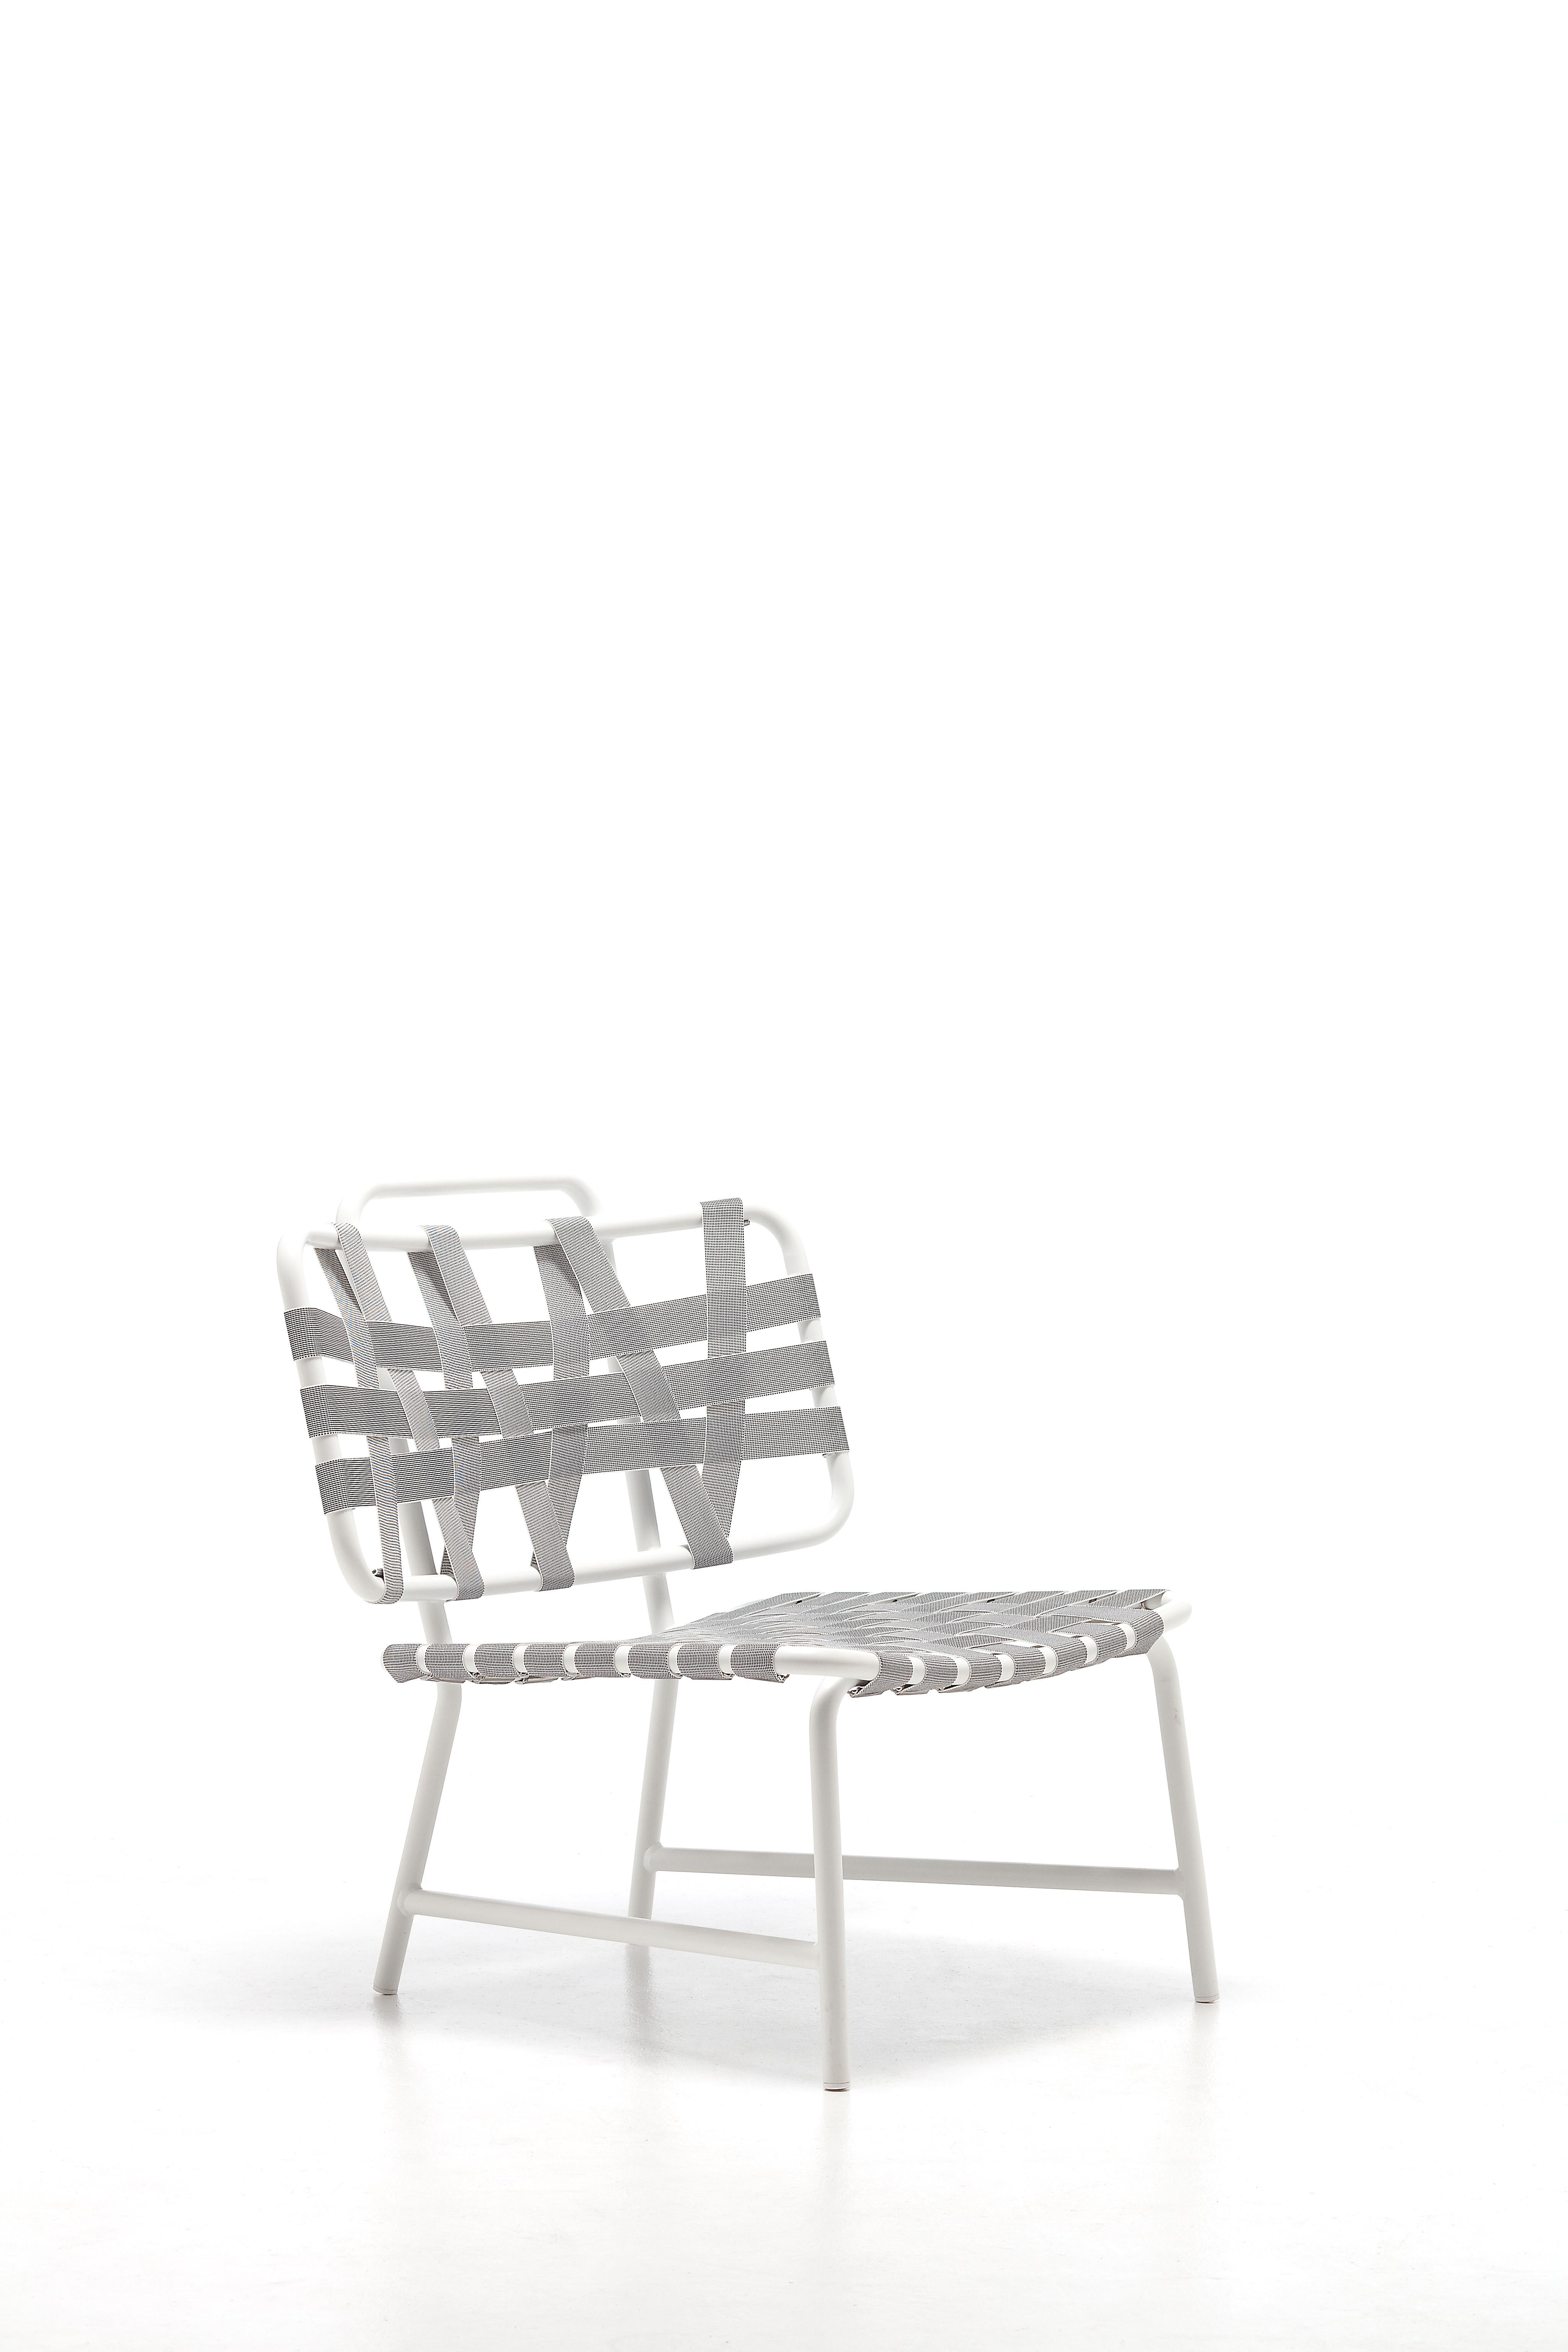 Defined by a wide seat with slightly curved backrest for an enveloping furnishing element, the Inout 856 lounge chair develops around a light structure in white, grey or sage painted tubular aluminium, an ecological material, unique for its